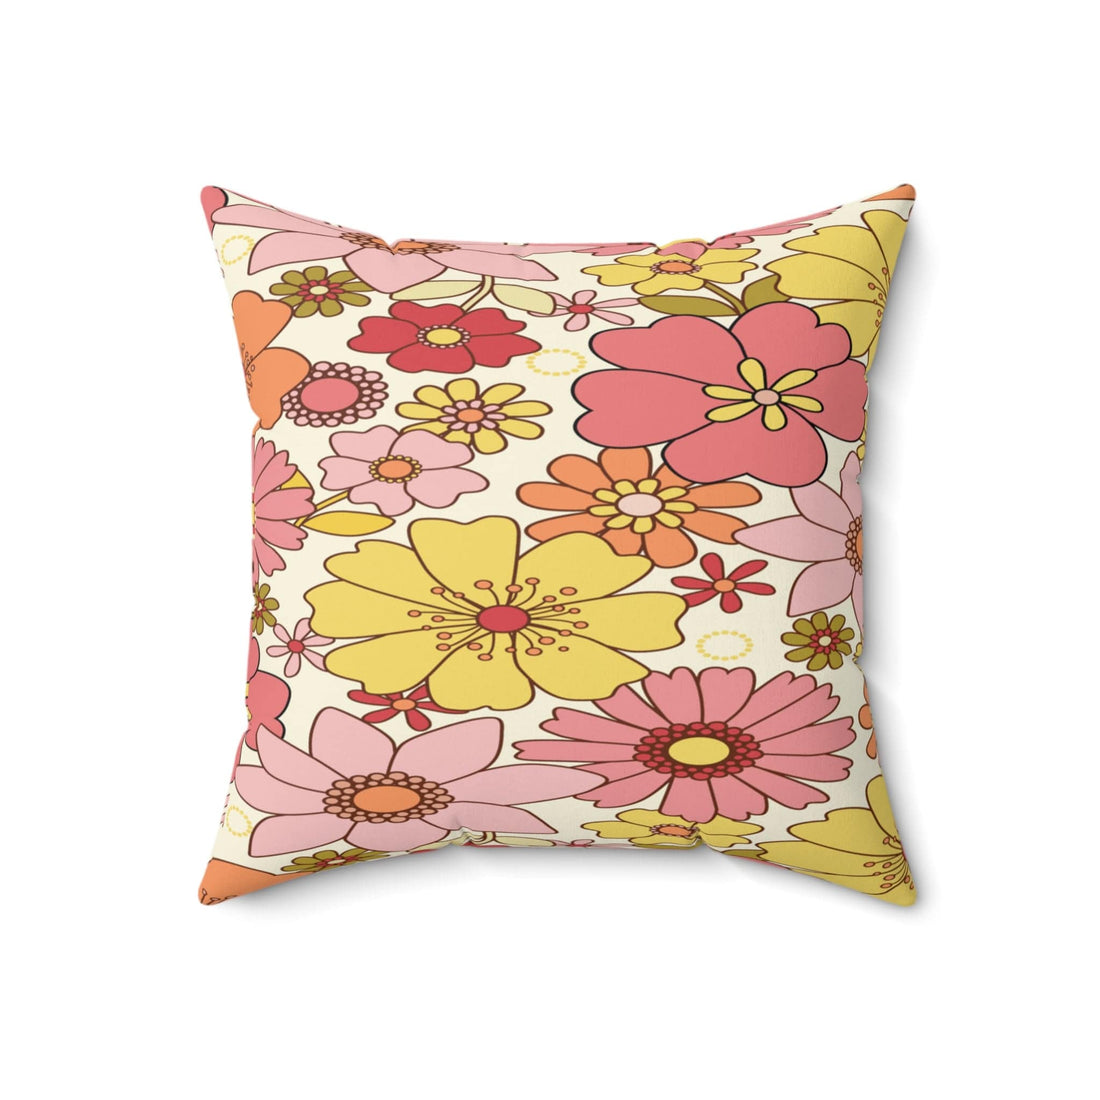 Kate McEnroe New York Retro Floral Throw Pillows with Insert, Flower Power Bohemian Home Decor, Mid Century Modern Living Room and Bedroom Accent PillowsThrow Pillows13339194269735237997